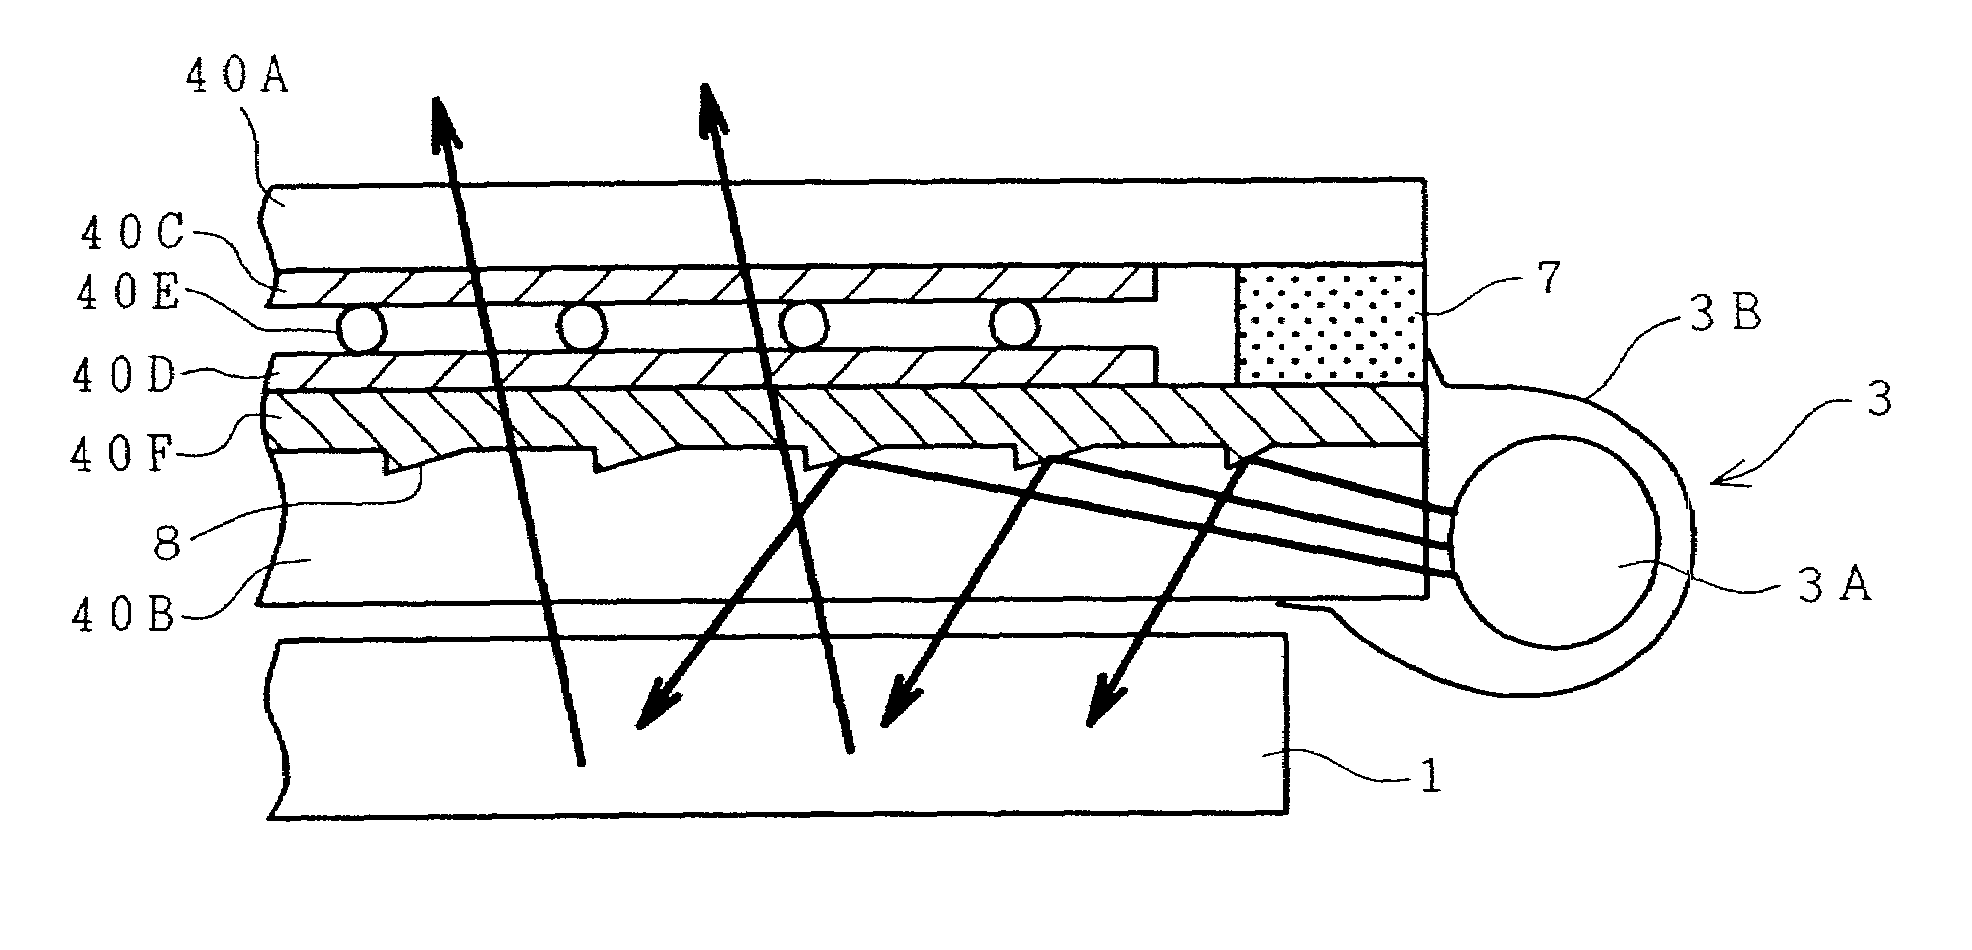 Liquid crystal display device with a touch panel